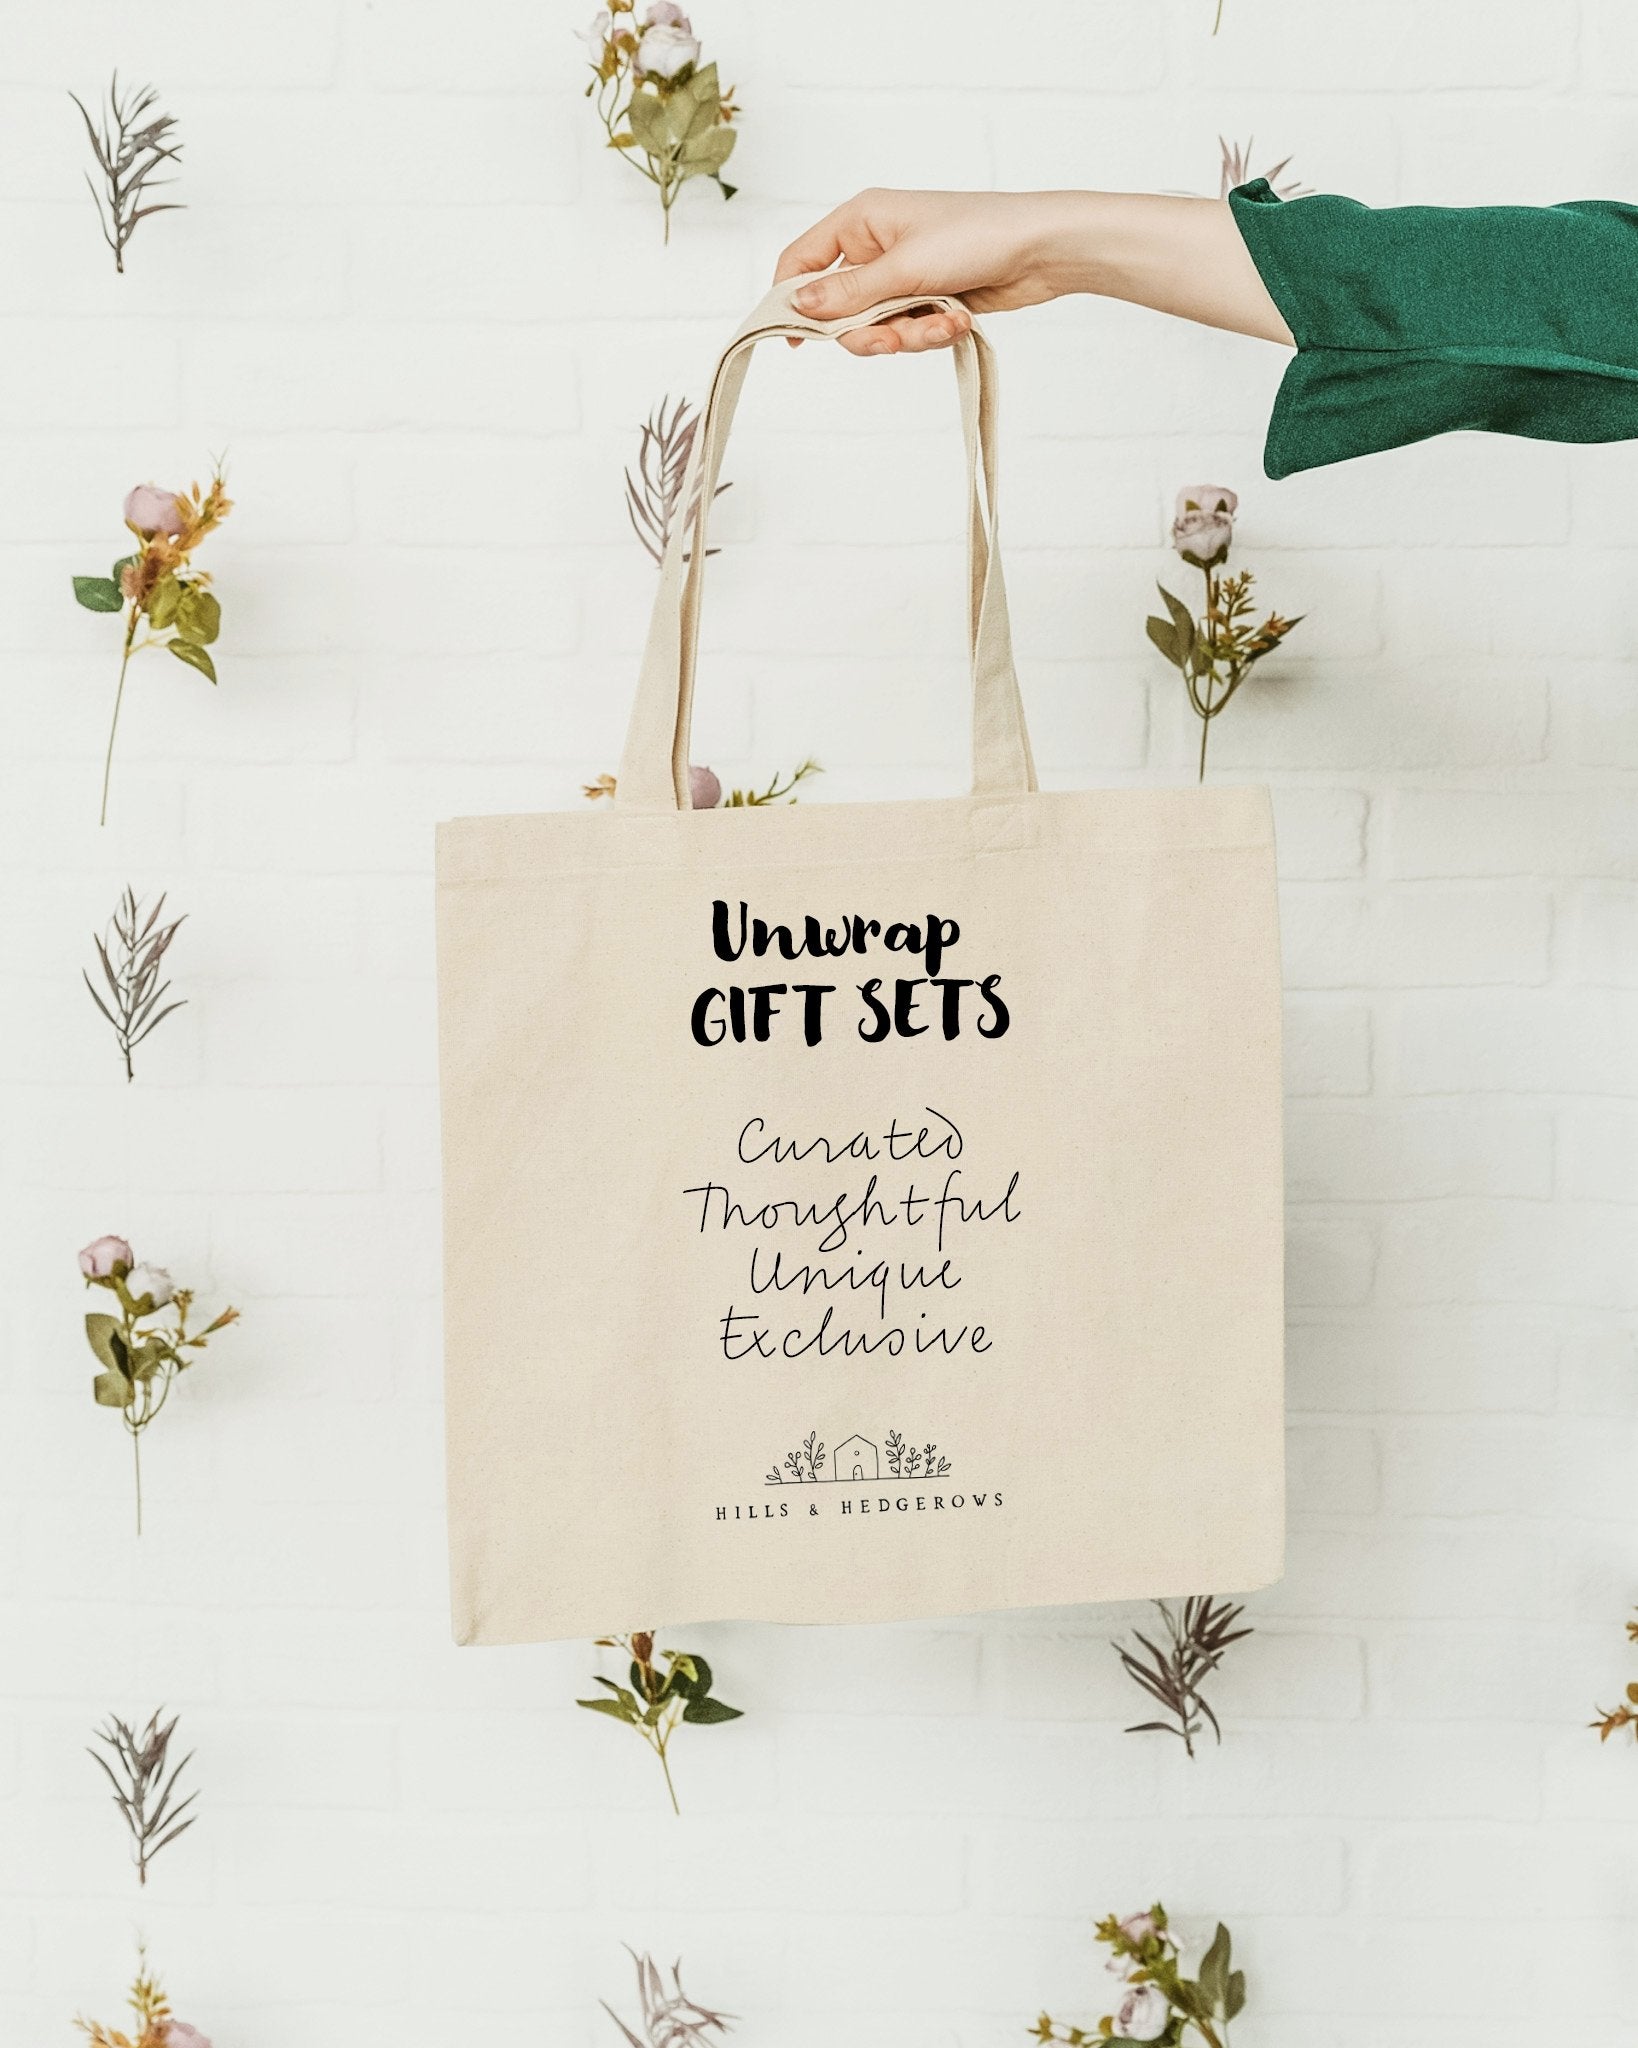 Thoughtful and handcrafted Curated Gift sets by Hills and hedgerows 